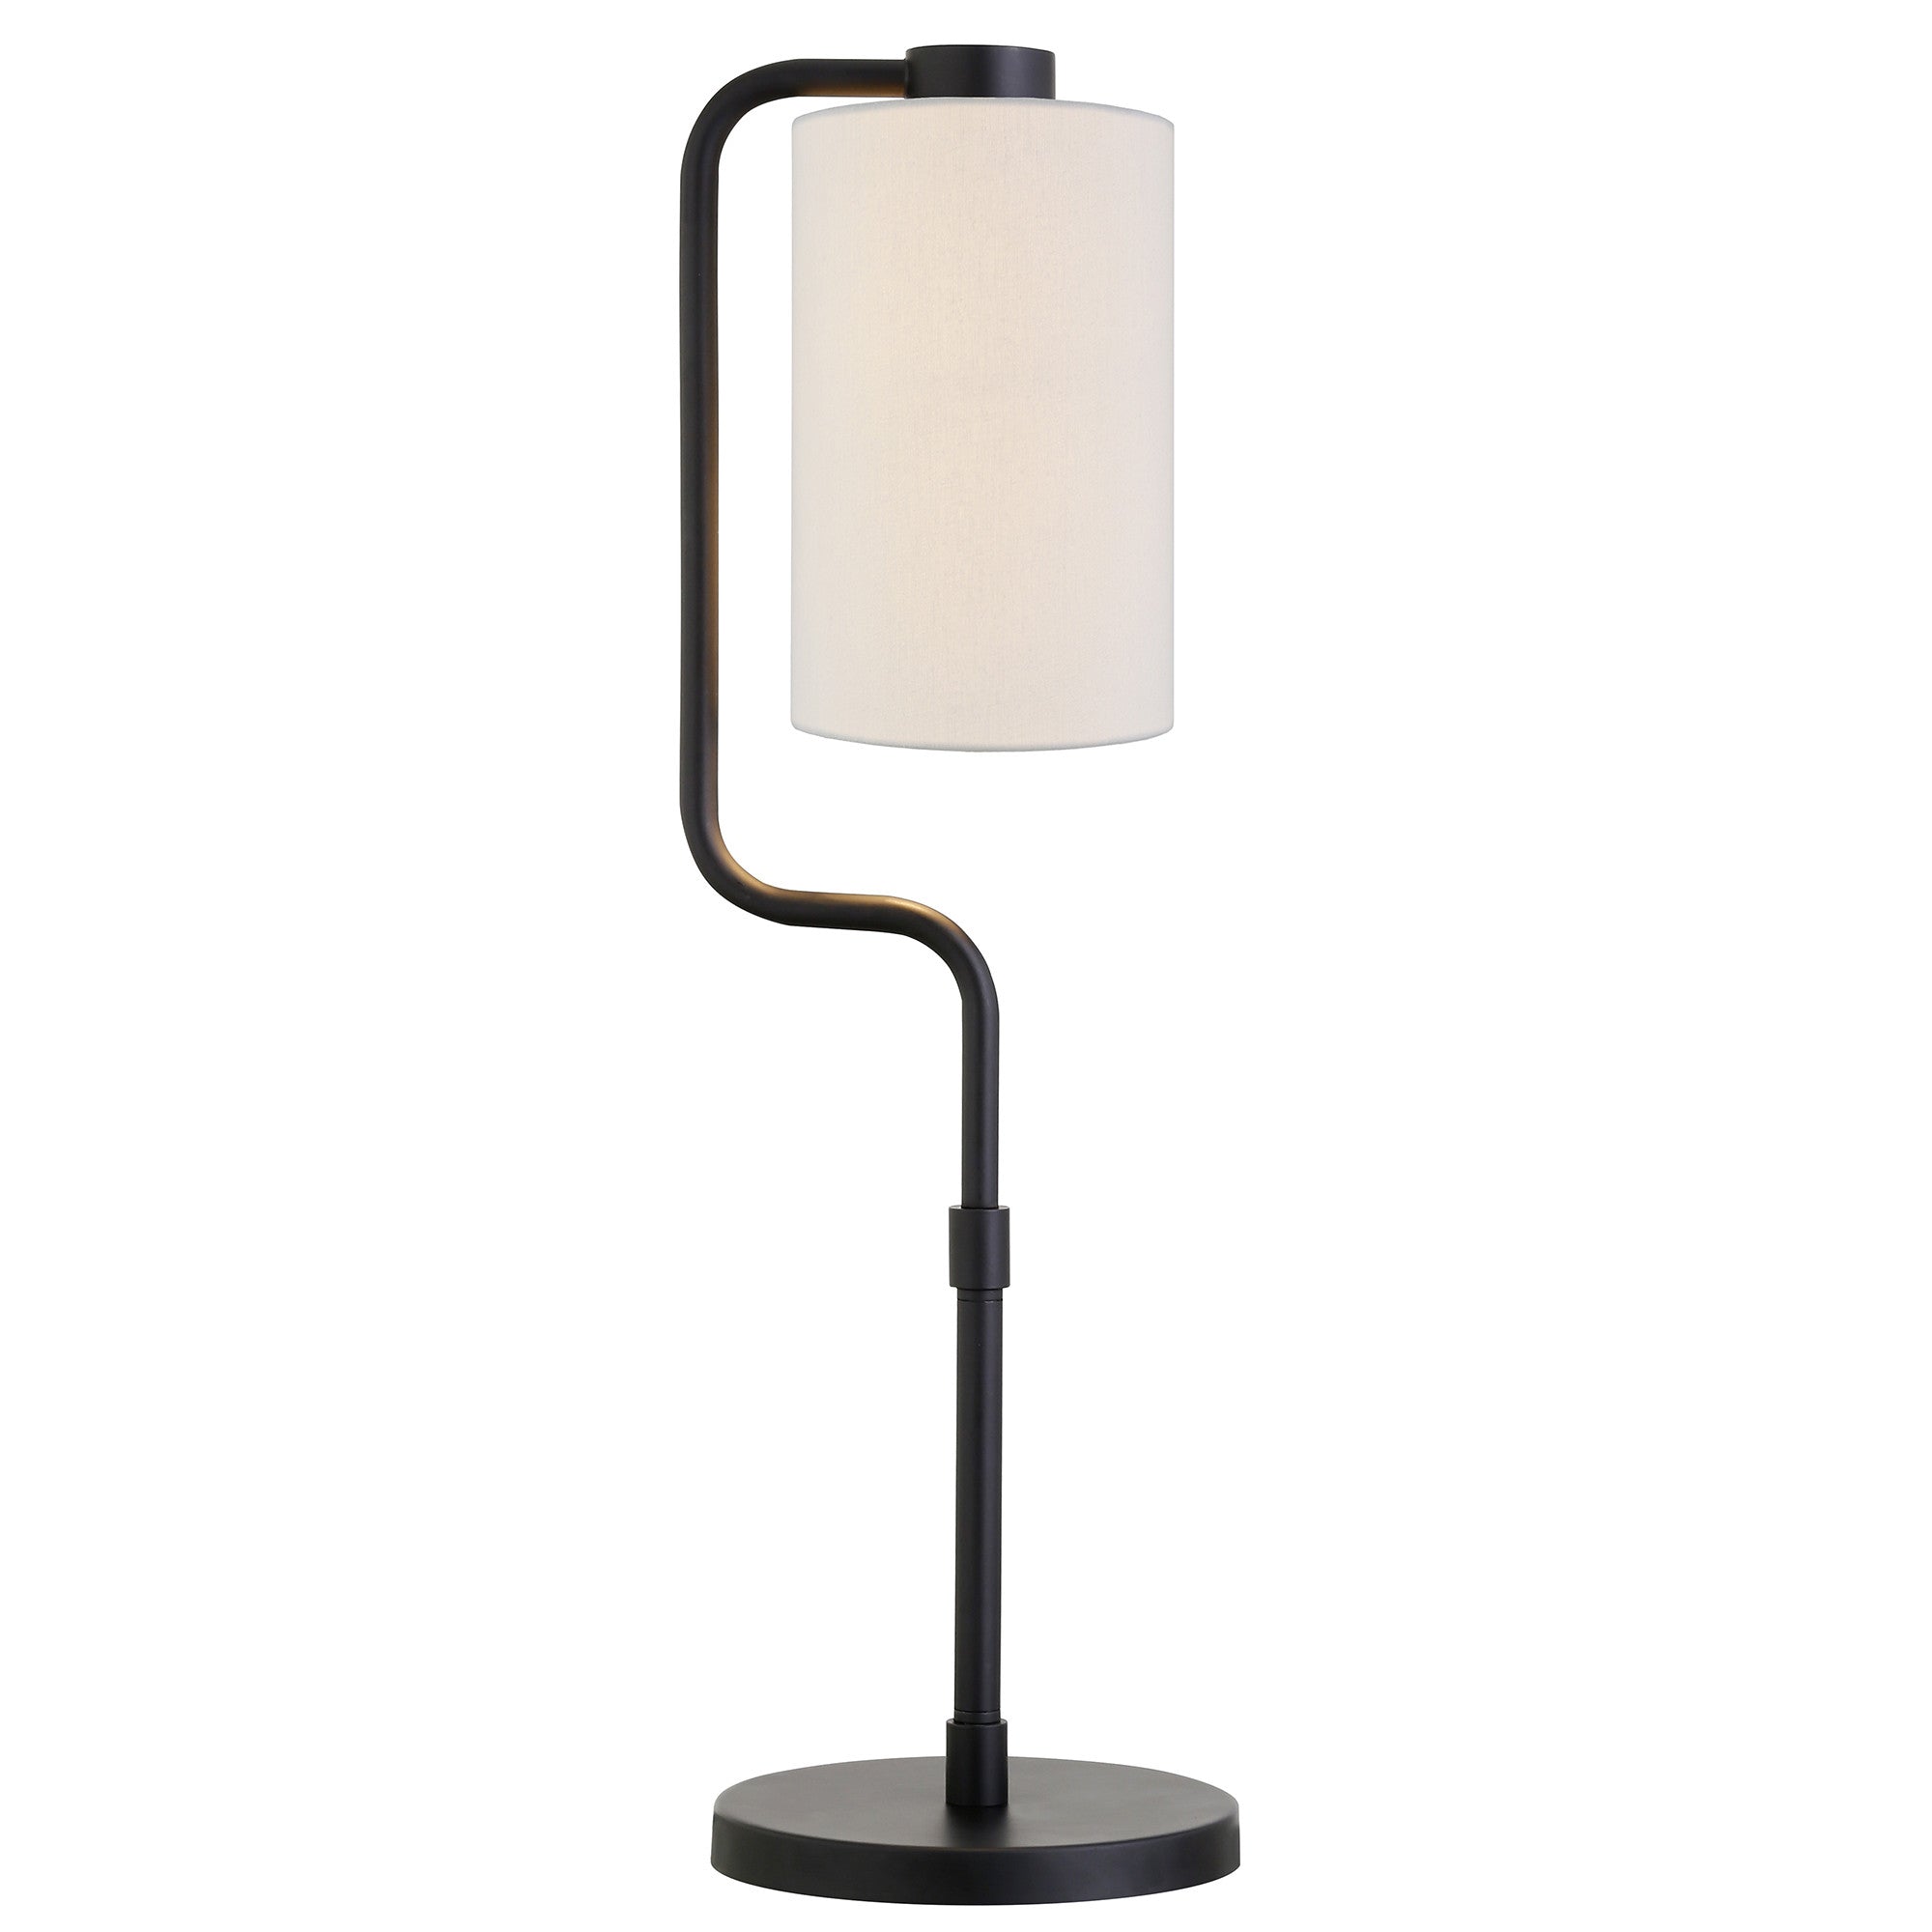 24" Black Metal Table Lamp With White Cylinder Shade